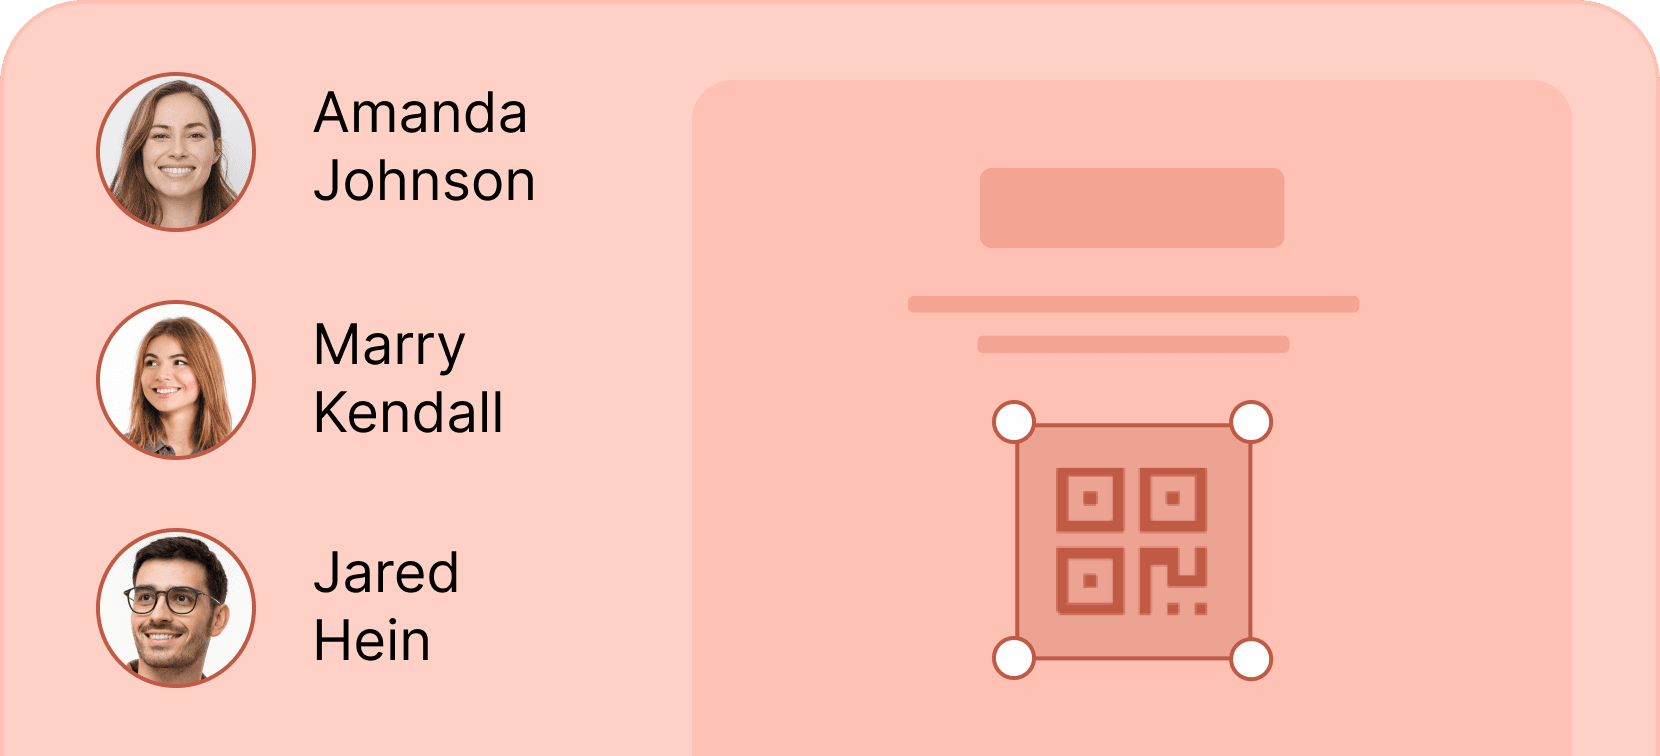 Add qr codes to issued credentials - Certifier features